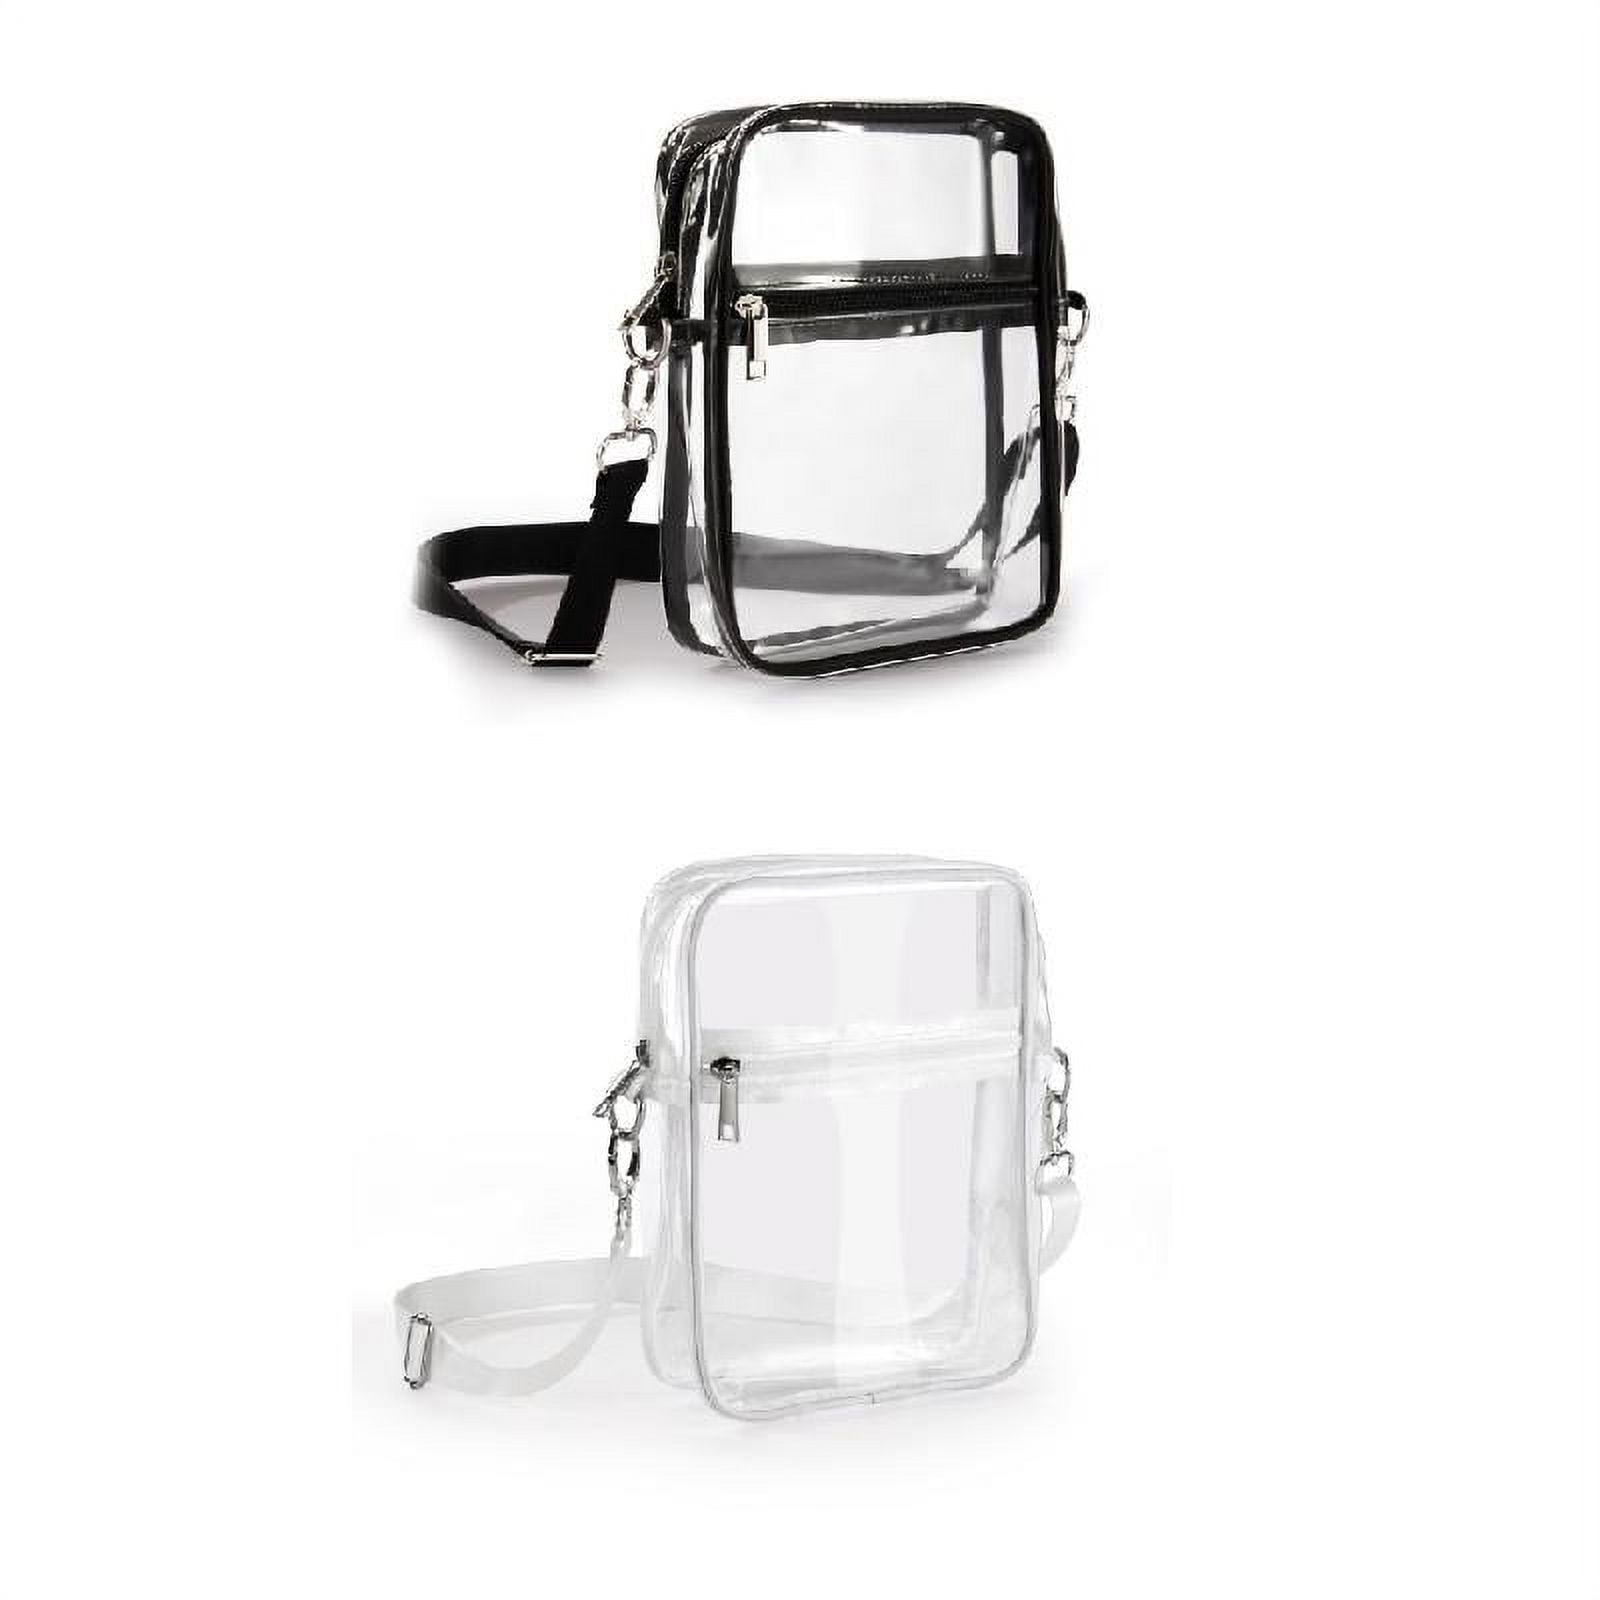 Yuanbang Clear Bag Stadium Approved, Clear Purse Crossbody Bag with Dual Pockets for Concert Sports Venue Festival Events(Pink), Women's, Size: Large